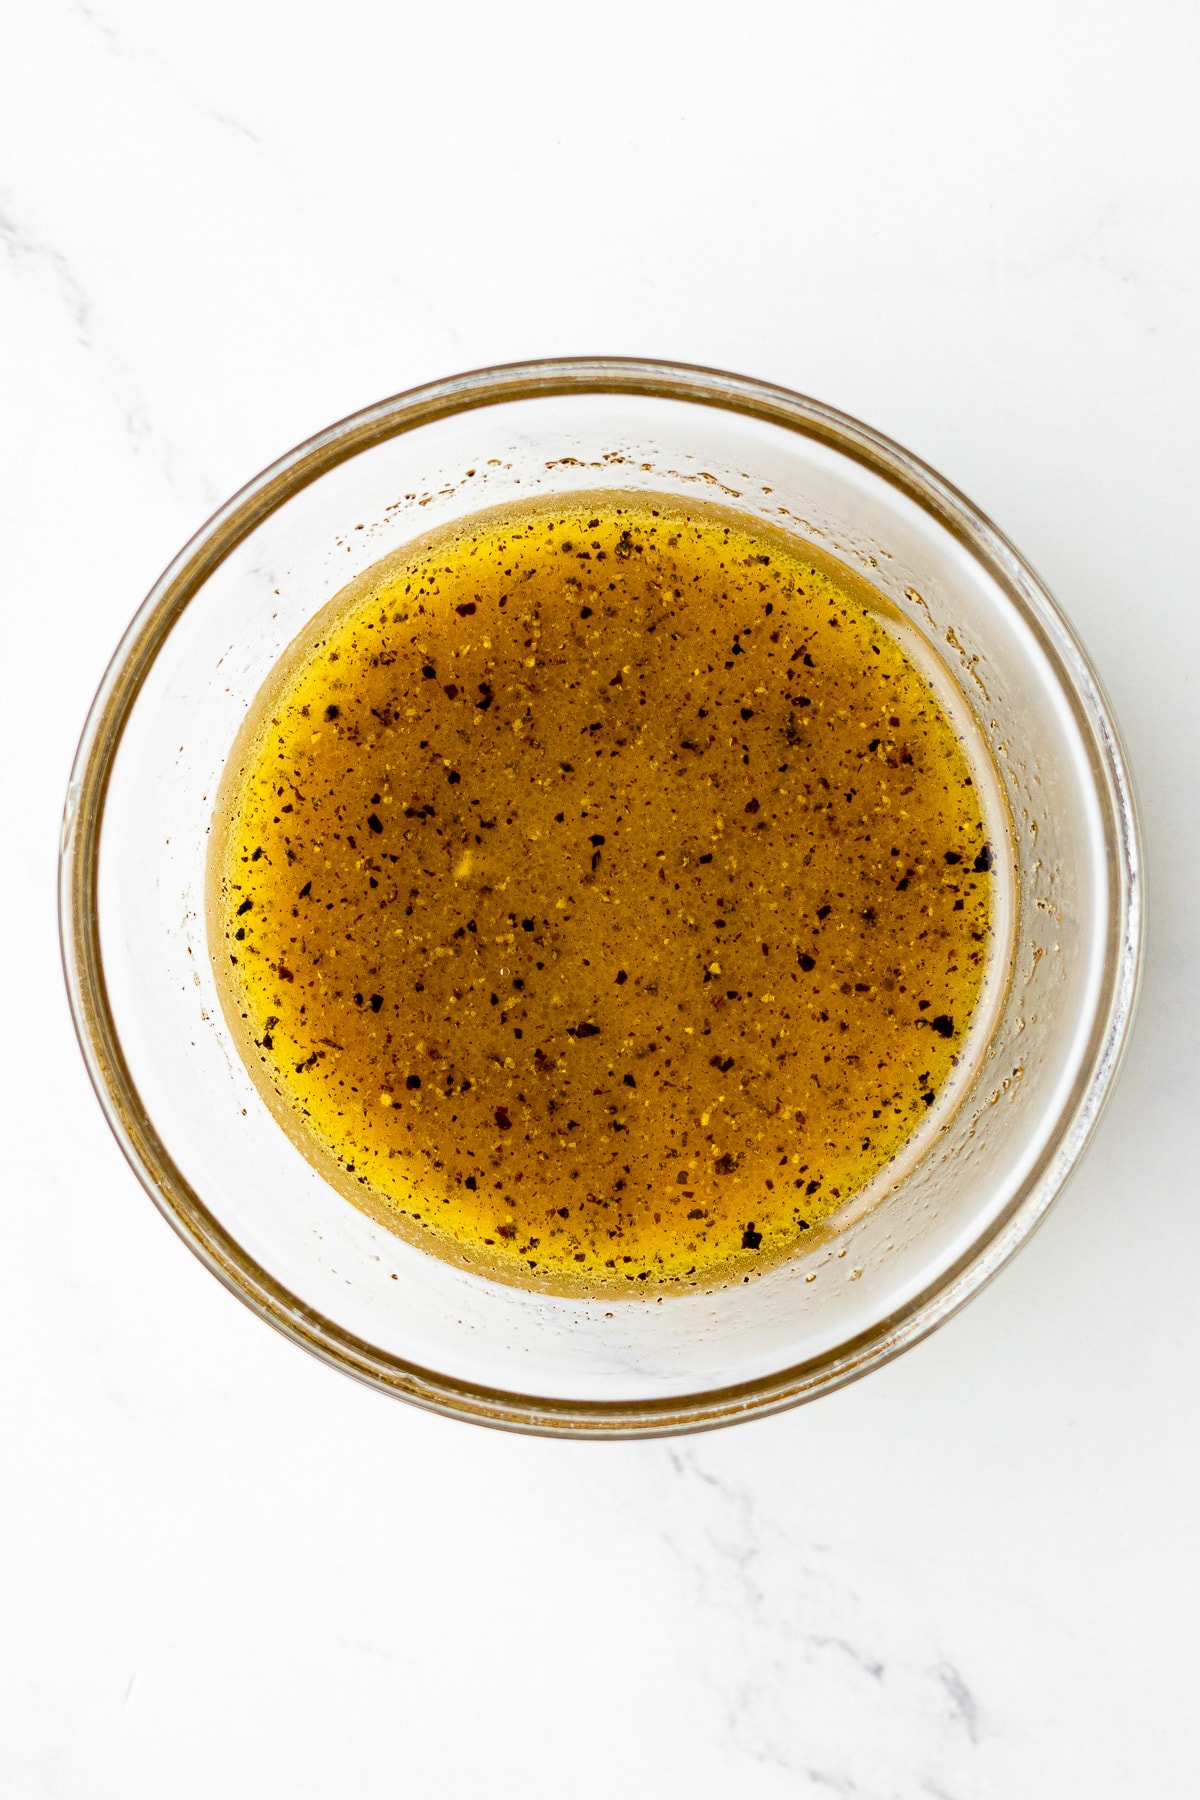 salad dressing in a small bowl